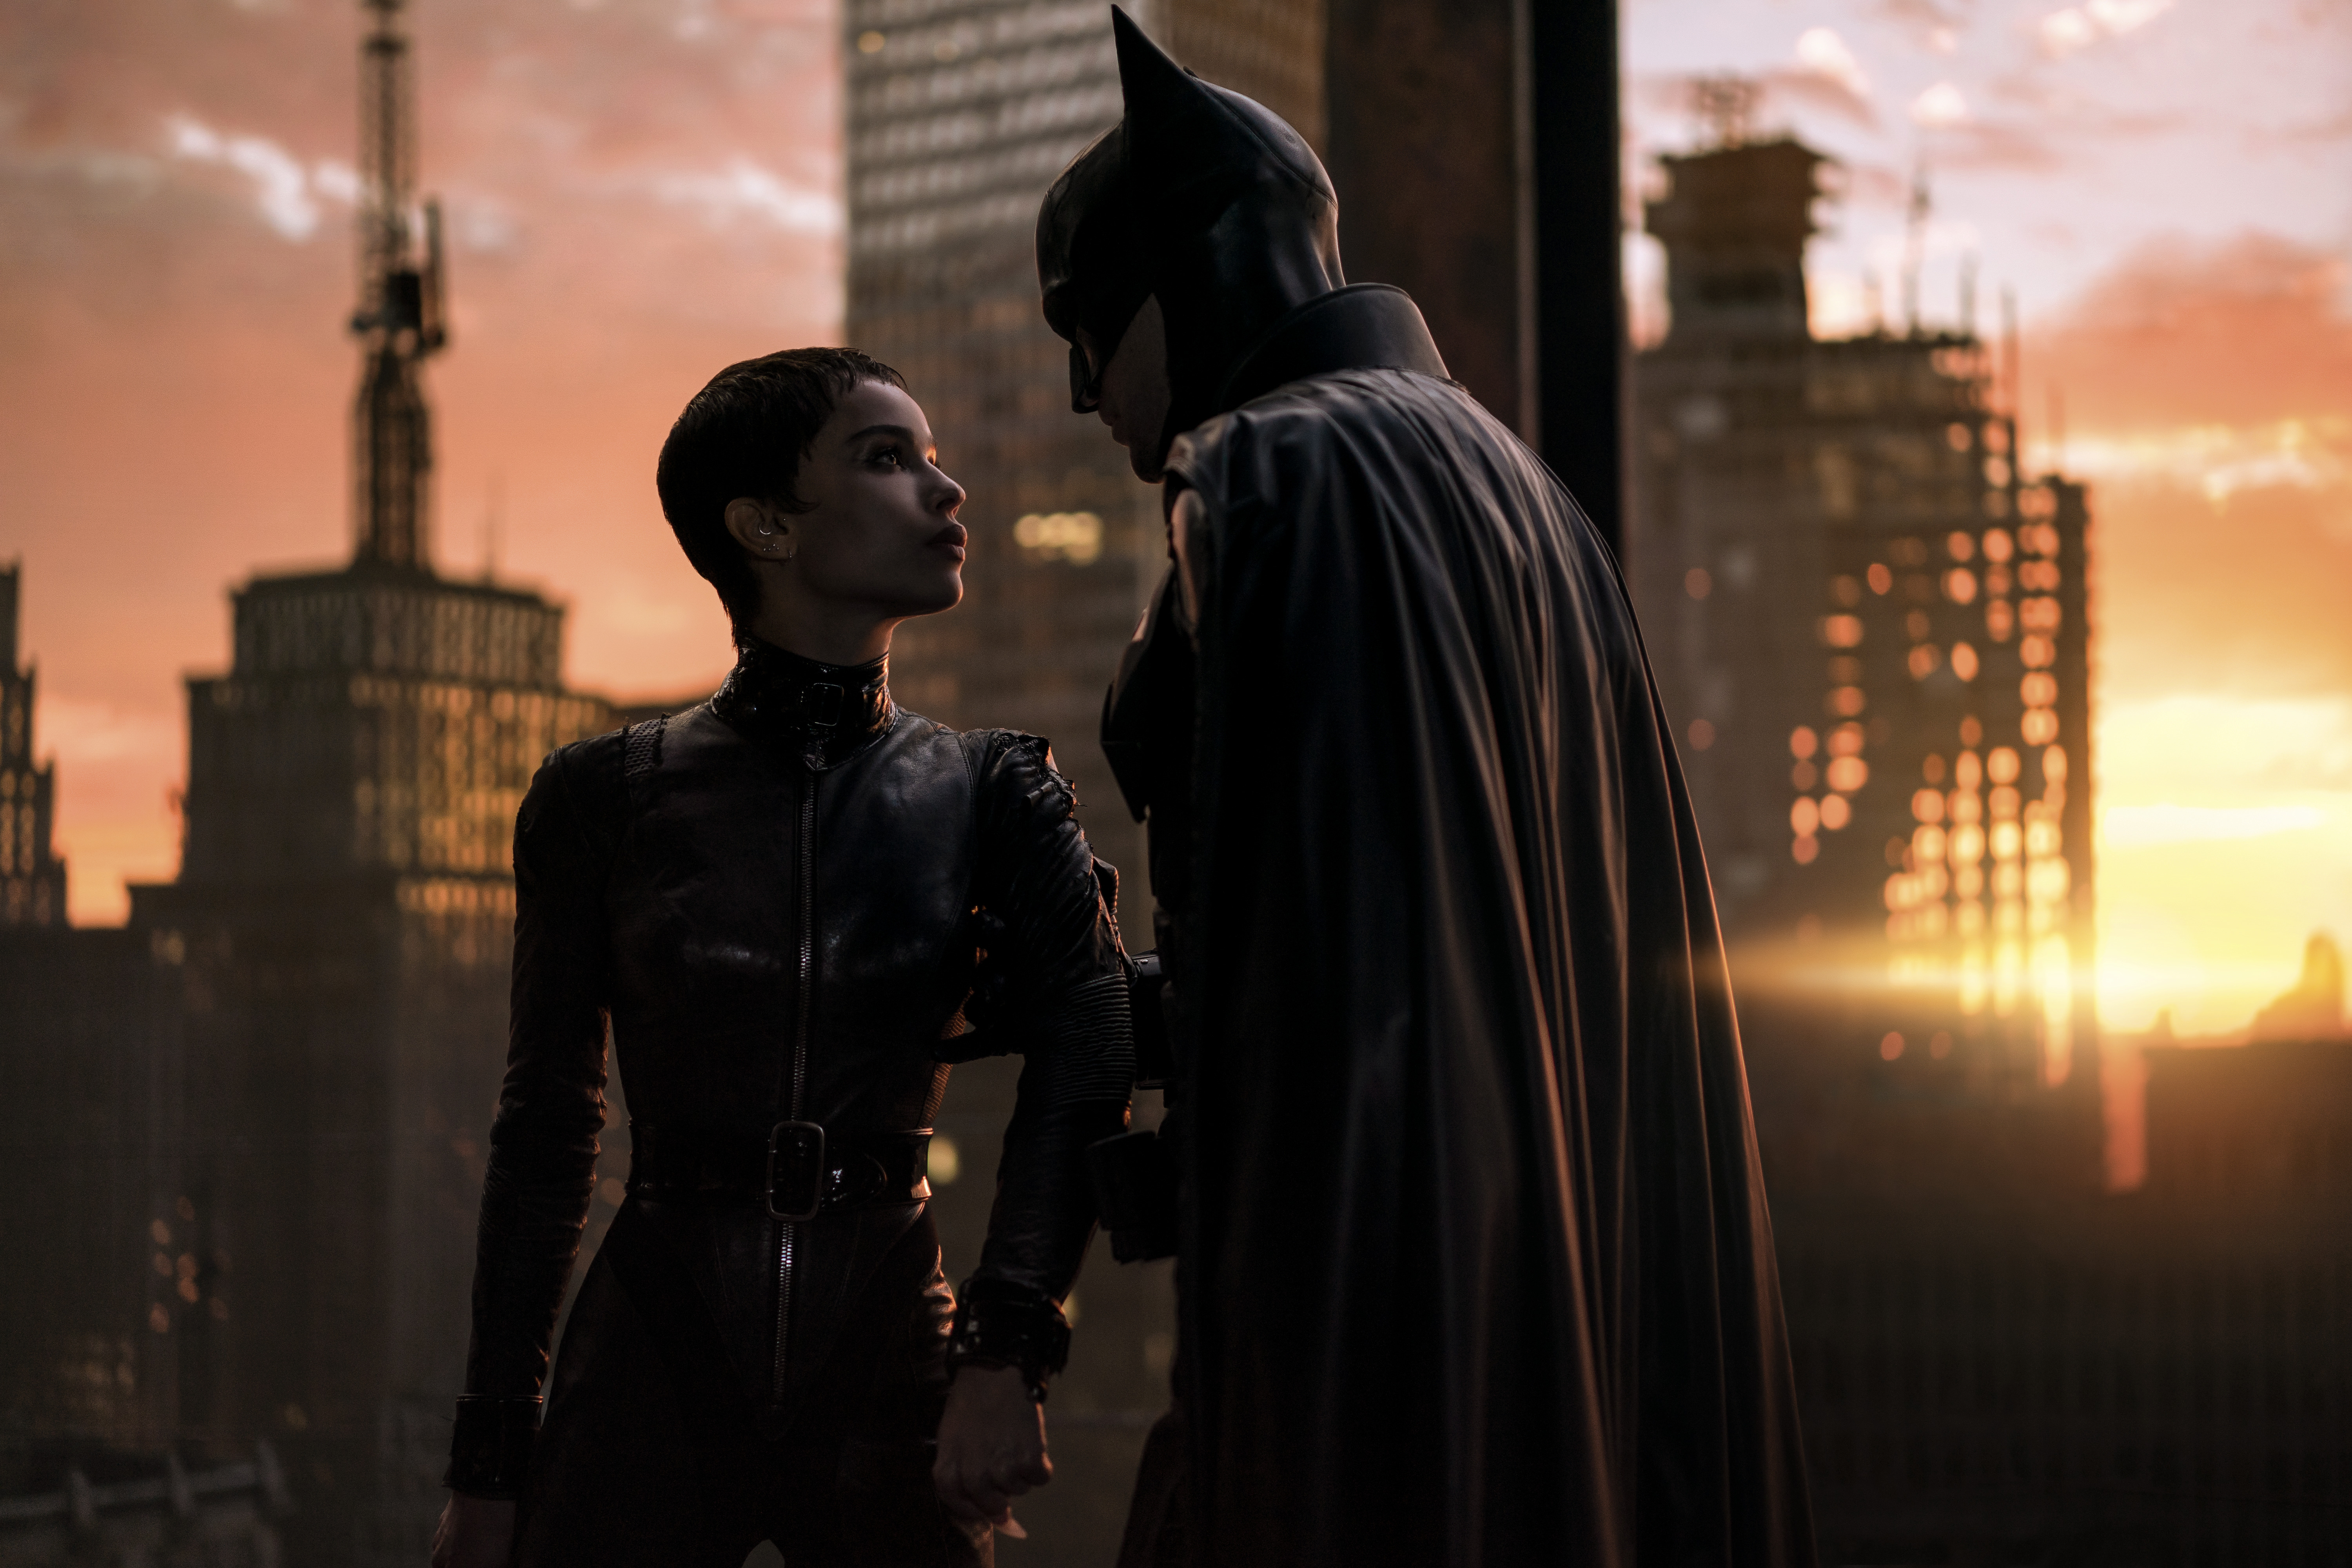 The Batman review: A sensational reboot in need of trimming | Ars Technica